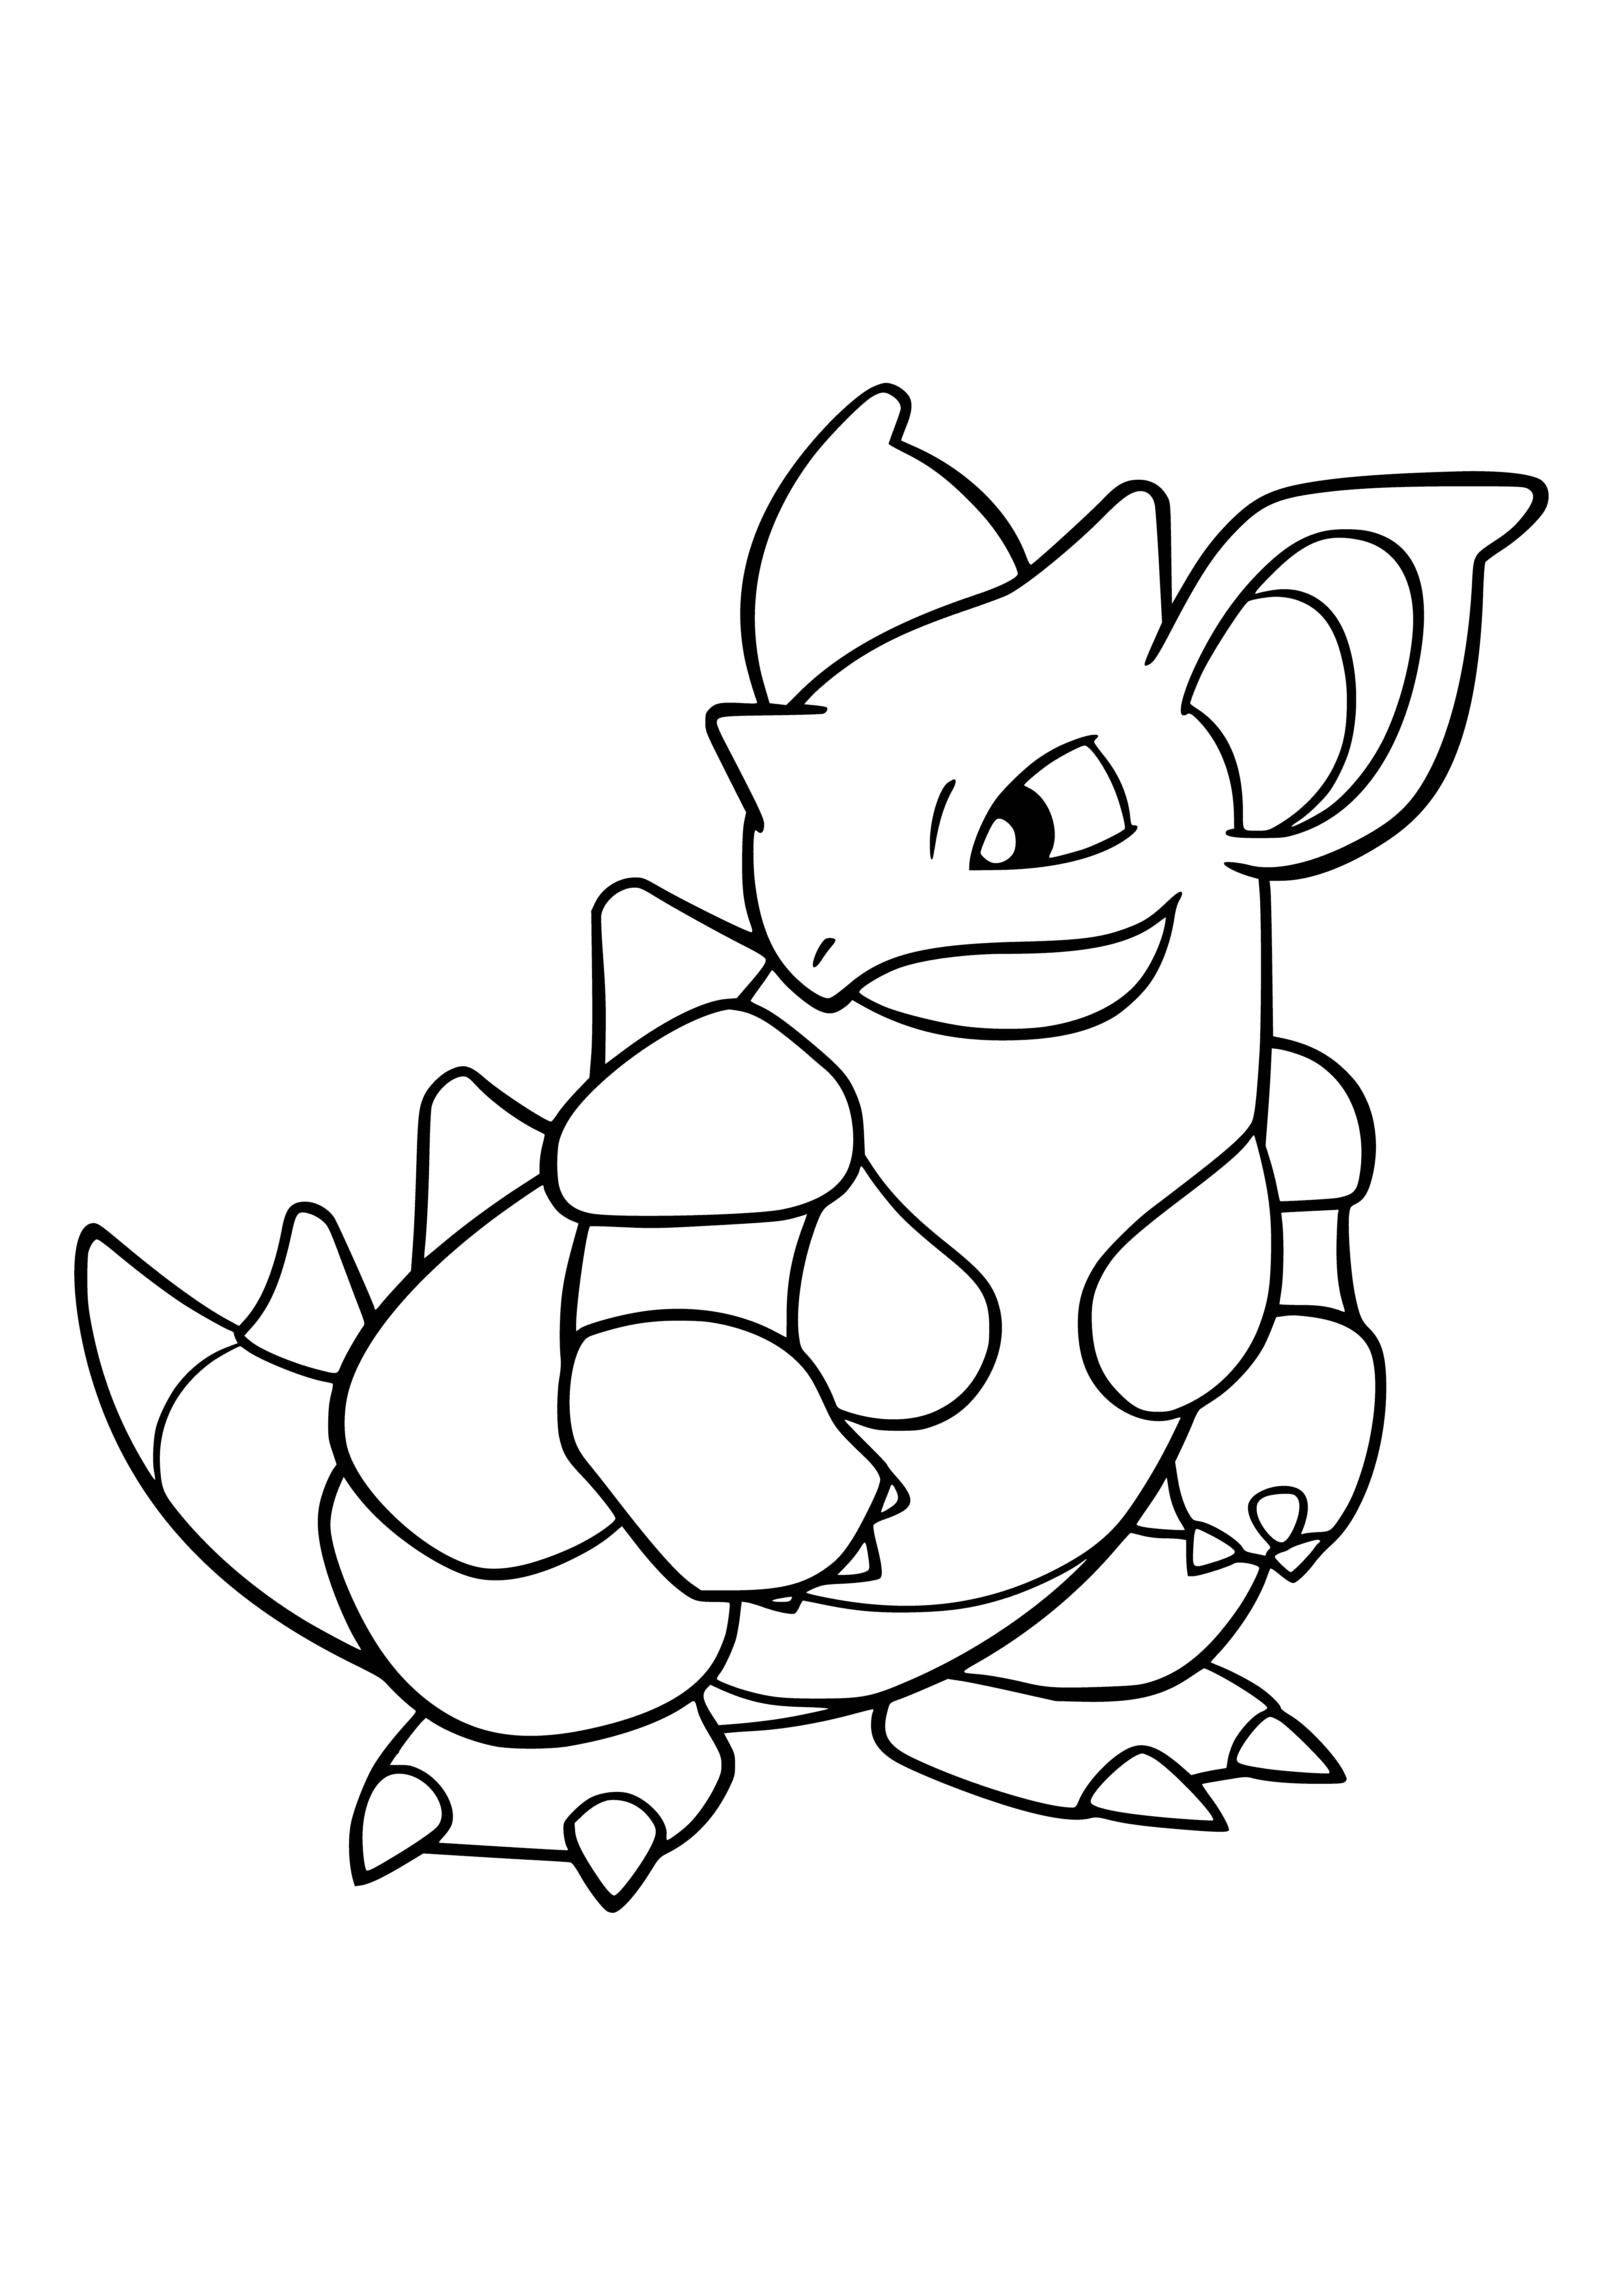 coloring page: Blue lizard-like Pokémon w/ rounded body, white underside, horn, 3 red spines, whiplike tail, and 4 short legs w/clawed toes.